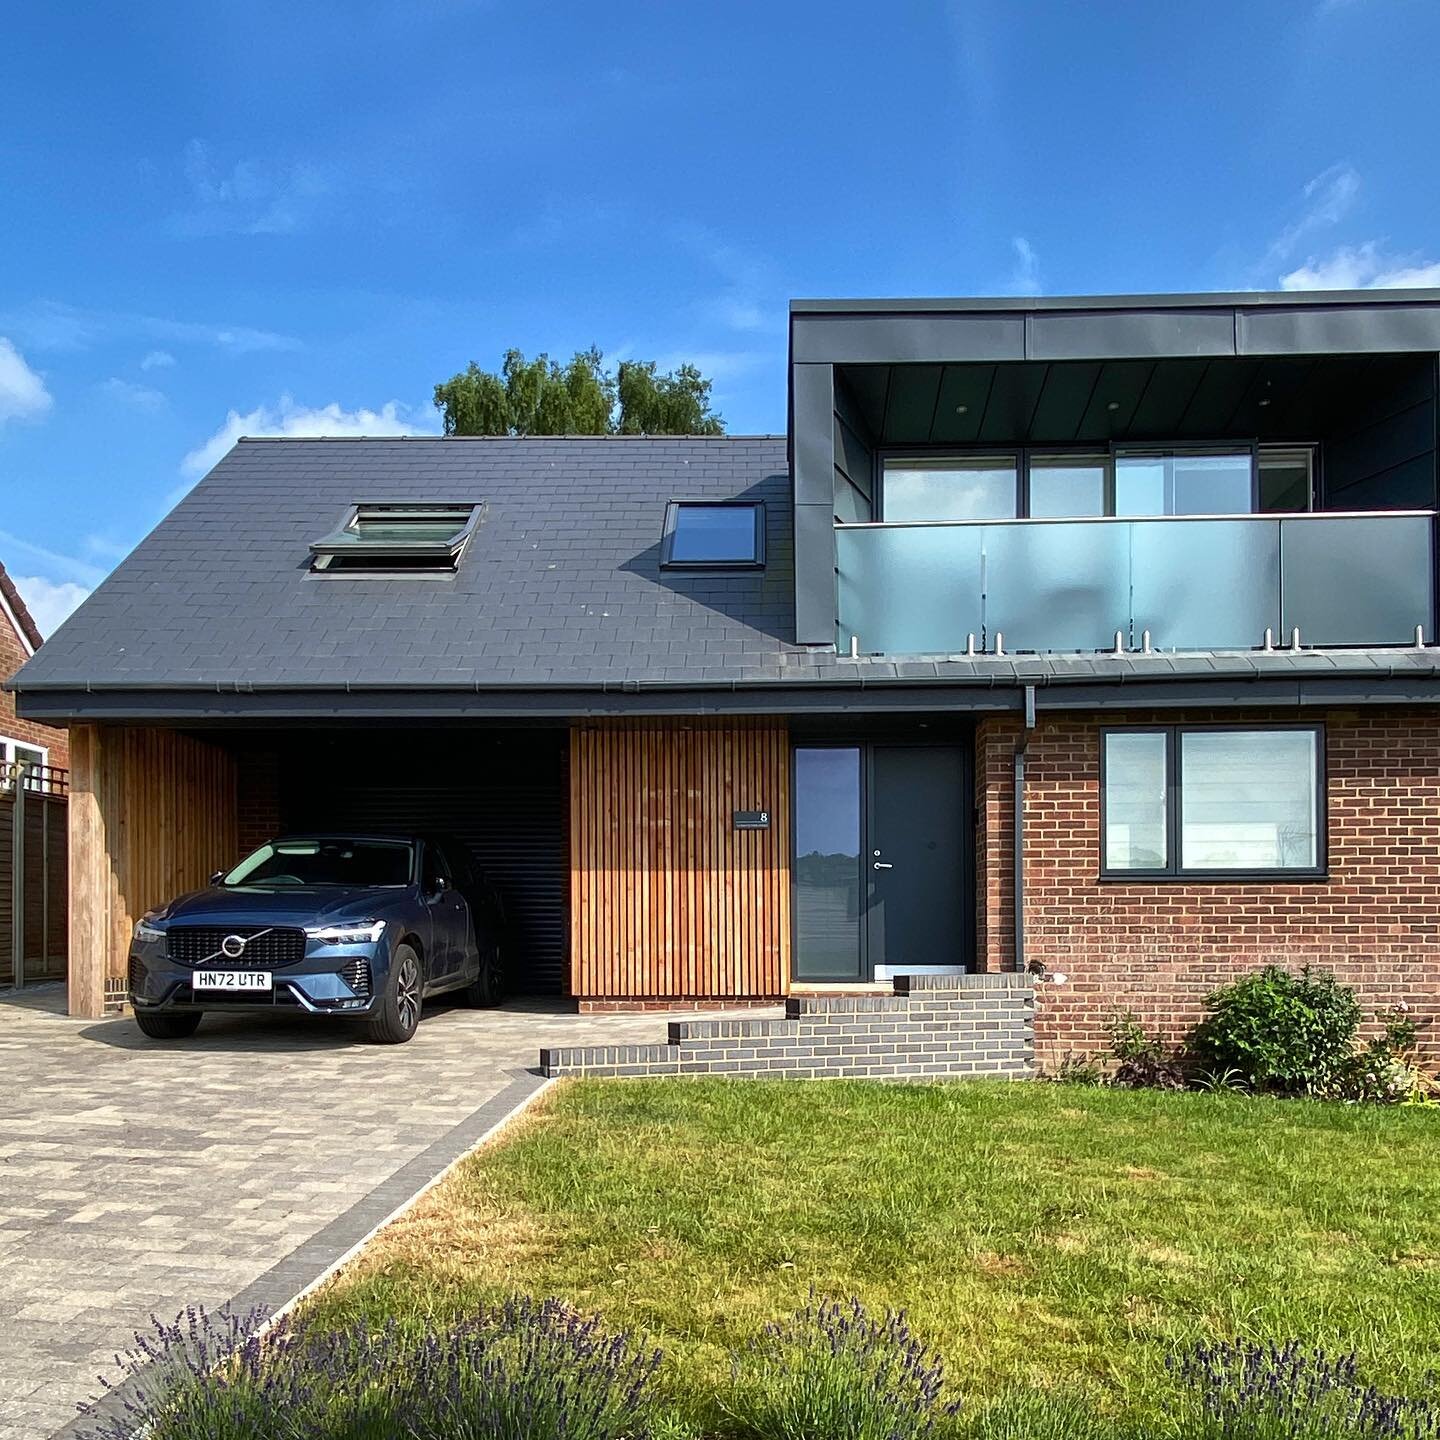 Sunnydown Road revisited.
It was lovely to go back and see how our Clients are enjoying their home in Olivers Battery recently.  Having lived in the extended and refurbished house for over a year now, our Clients are delighted with how the layout wor